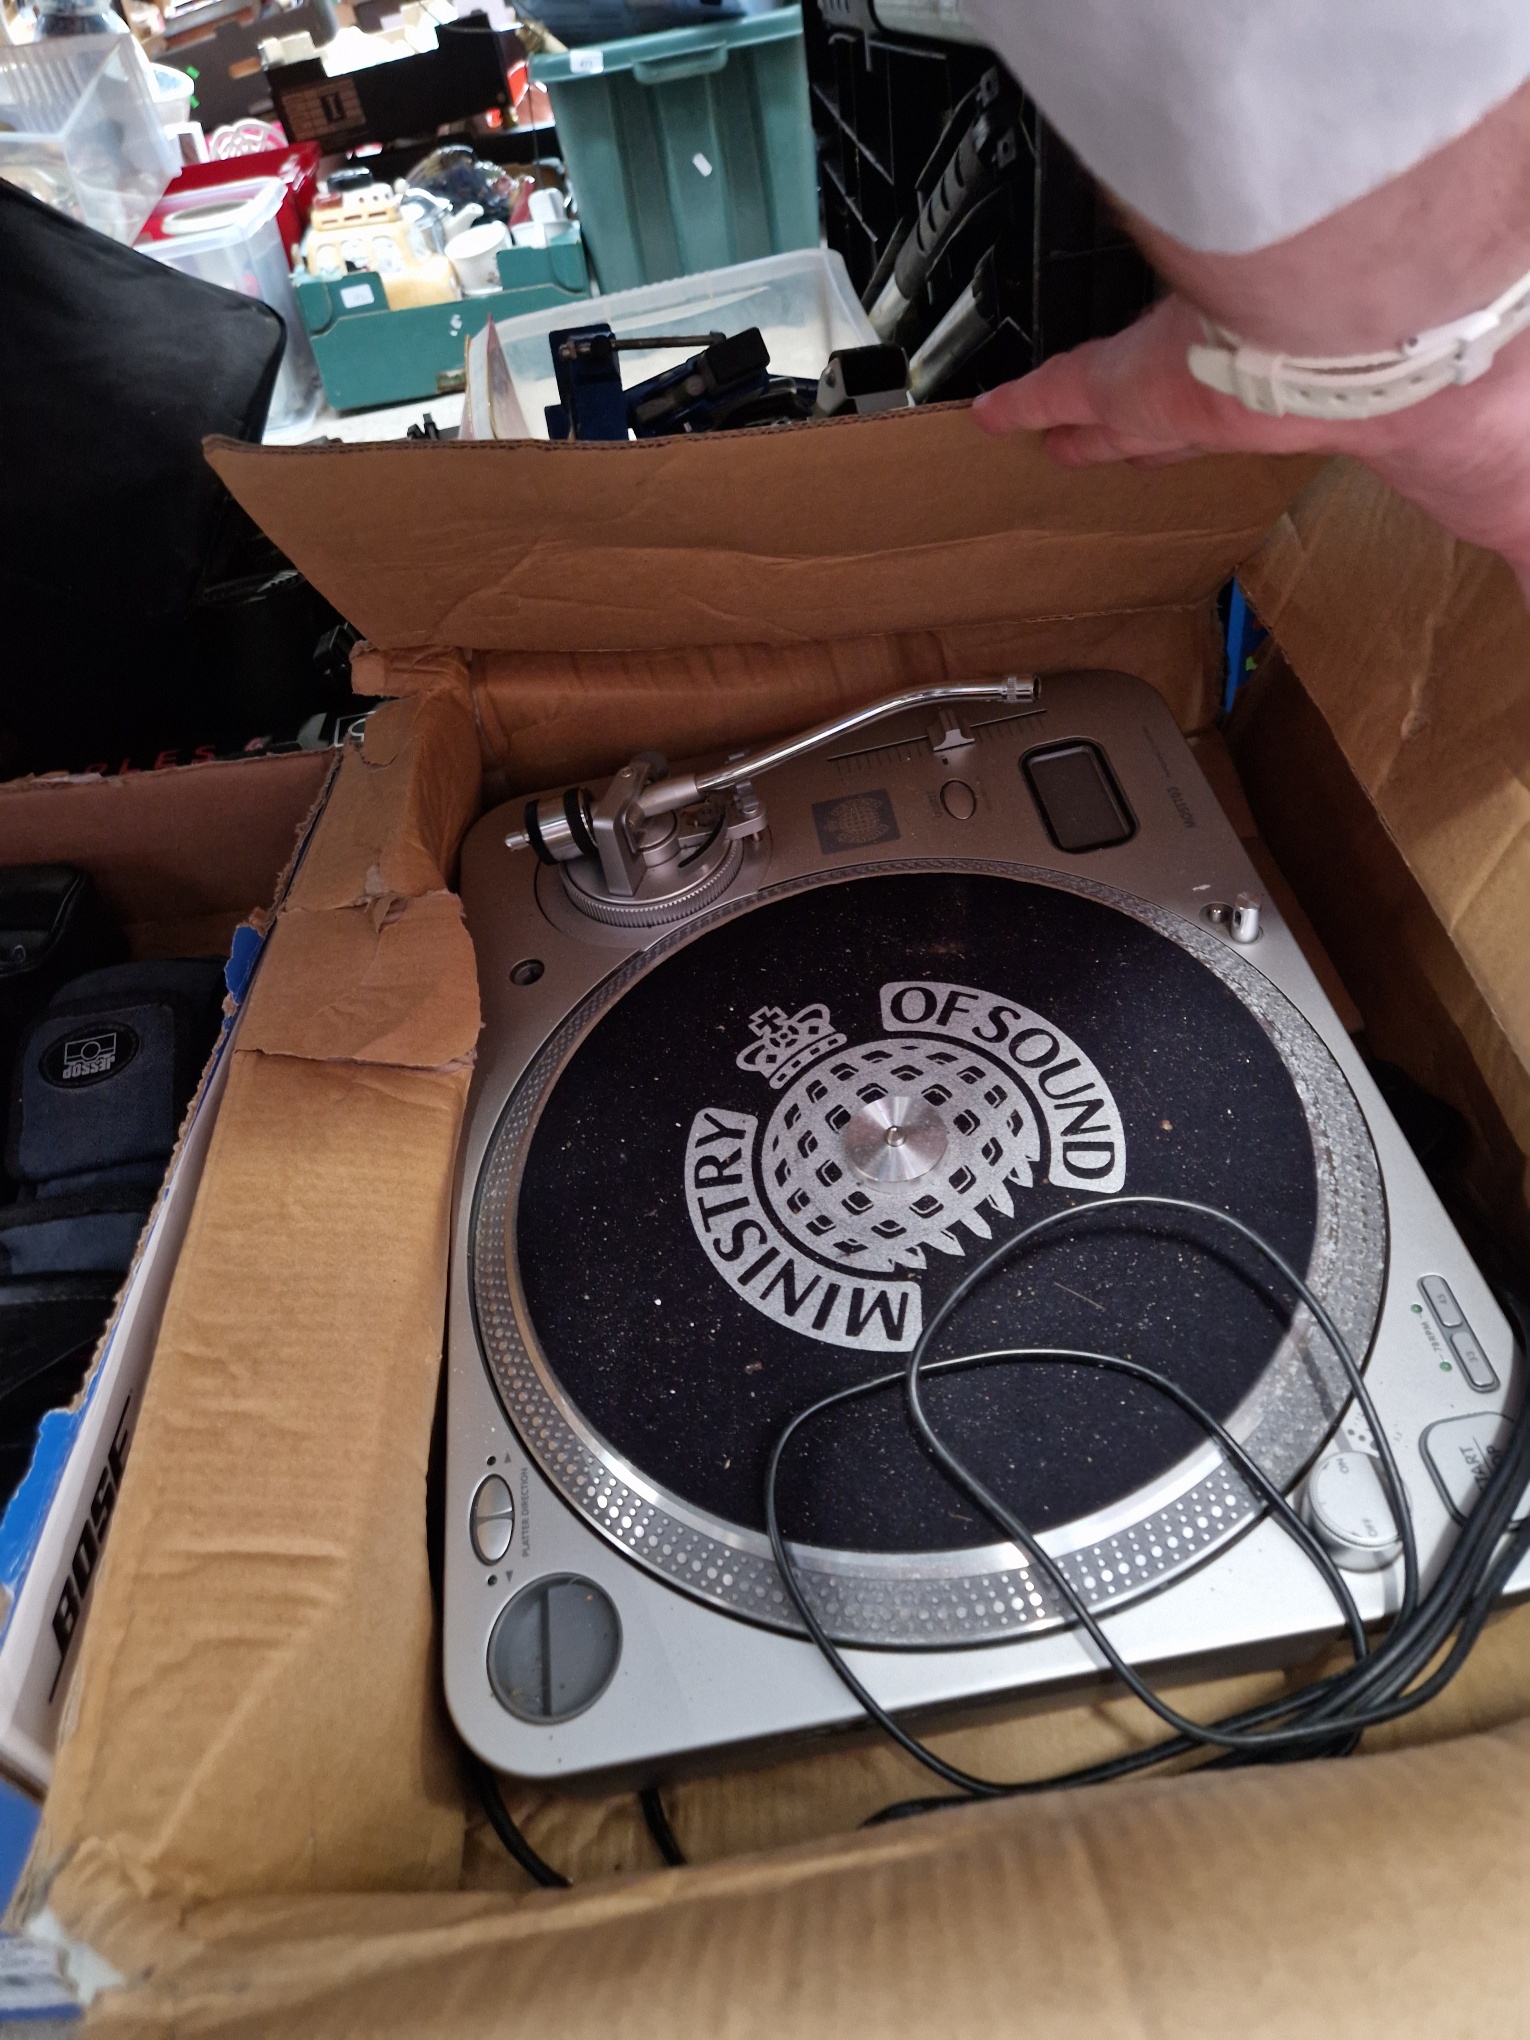 Two MOS ( Ministry of Sound ) turntables, model MOSTT03.